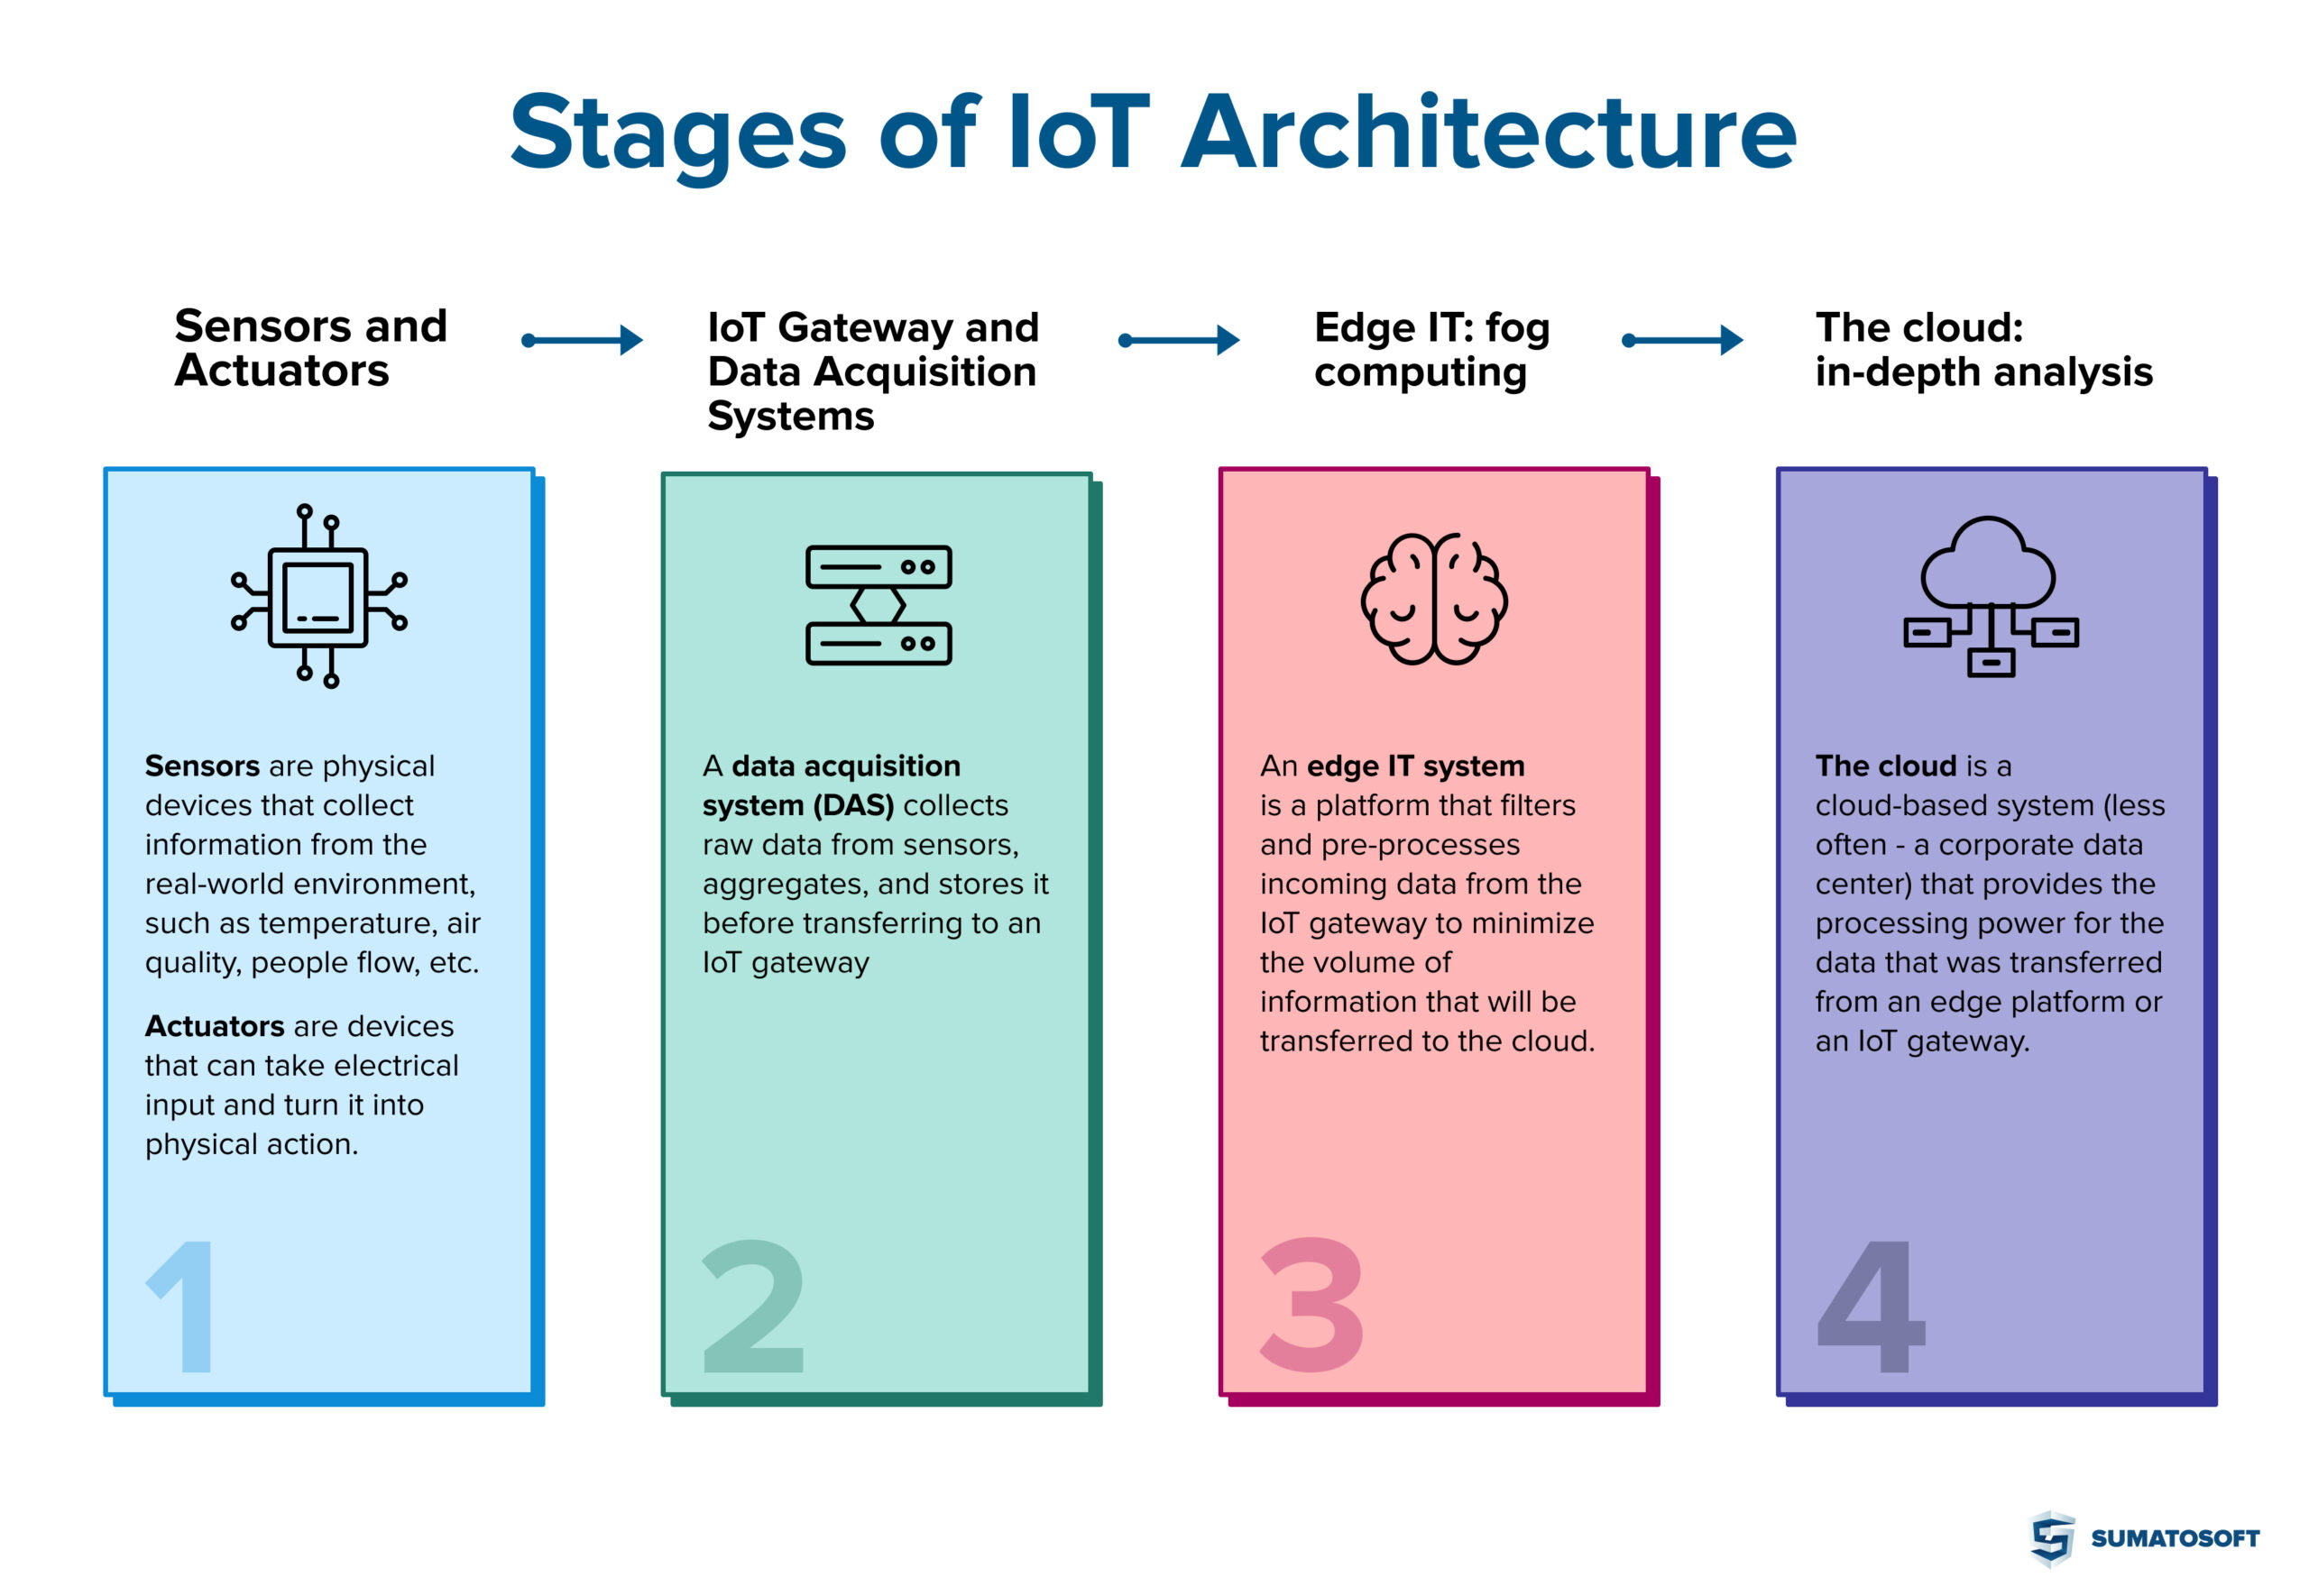 4 stages of IoT architecture by SumatoSoft